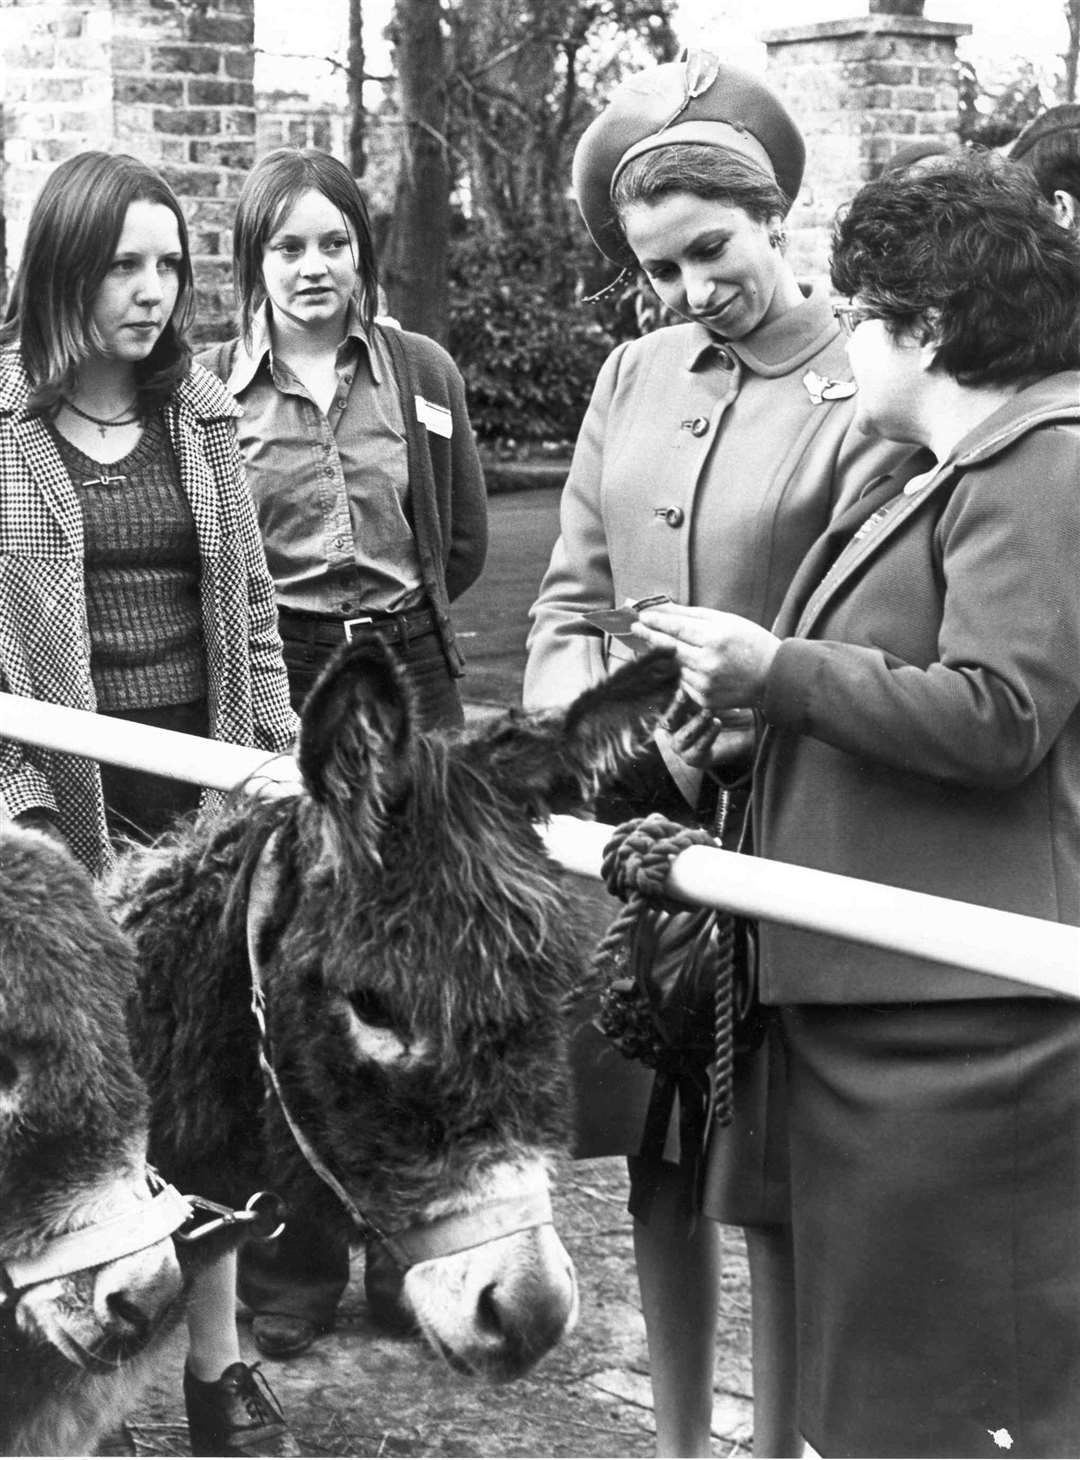 These donkeys caught the attention of Princess Anne in November 1974 when she visited Fairfield House School for deprived girls, in Broadstairs. She is seen here with headmistress Adrienne Brokke